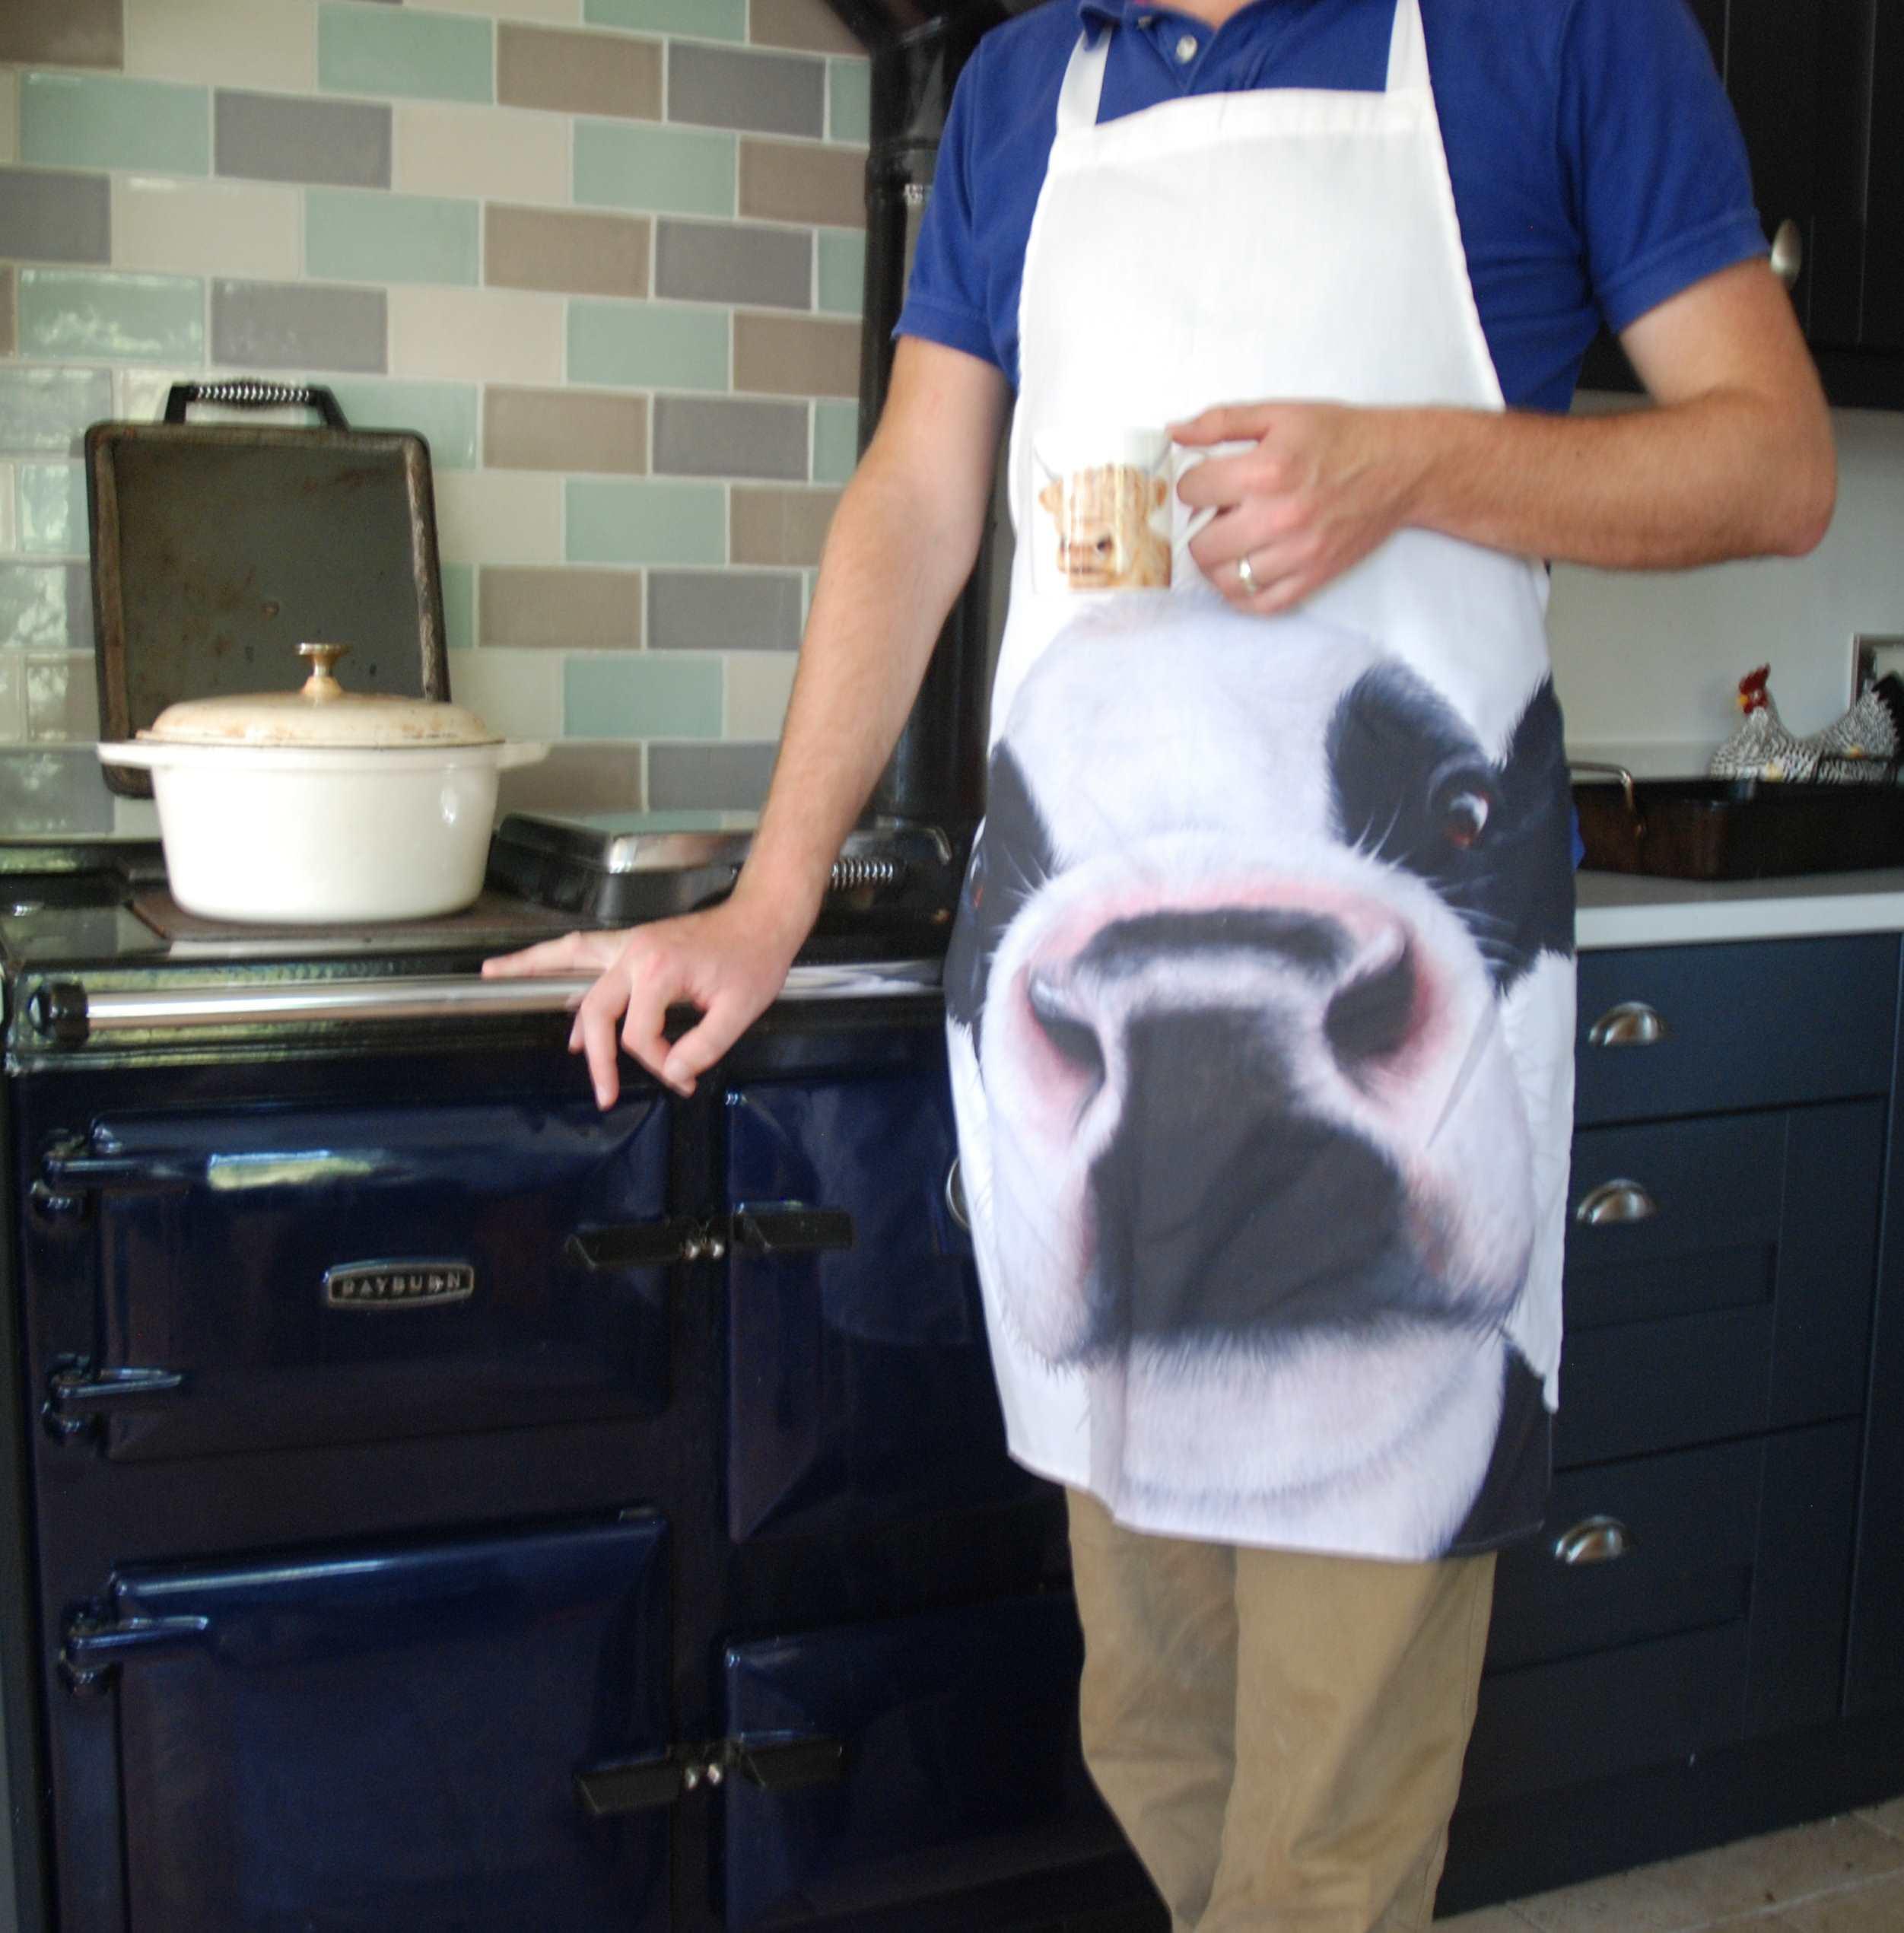 Blue 100% Cotton Stonewashed Printed 180Gsm Fabric Filled with 360Gsm Polyester Fibre Perfect For Home Cooking 18 x 90cm 18cm x 90cm Hairy Bikers Denim Double Oven Glove 